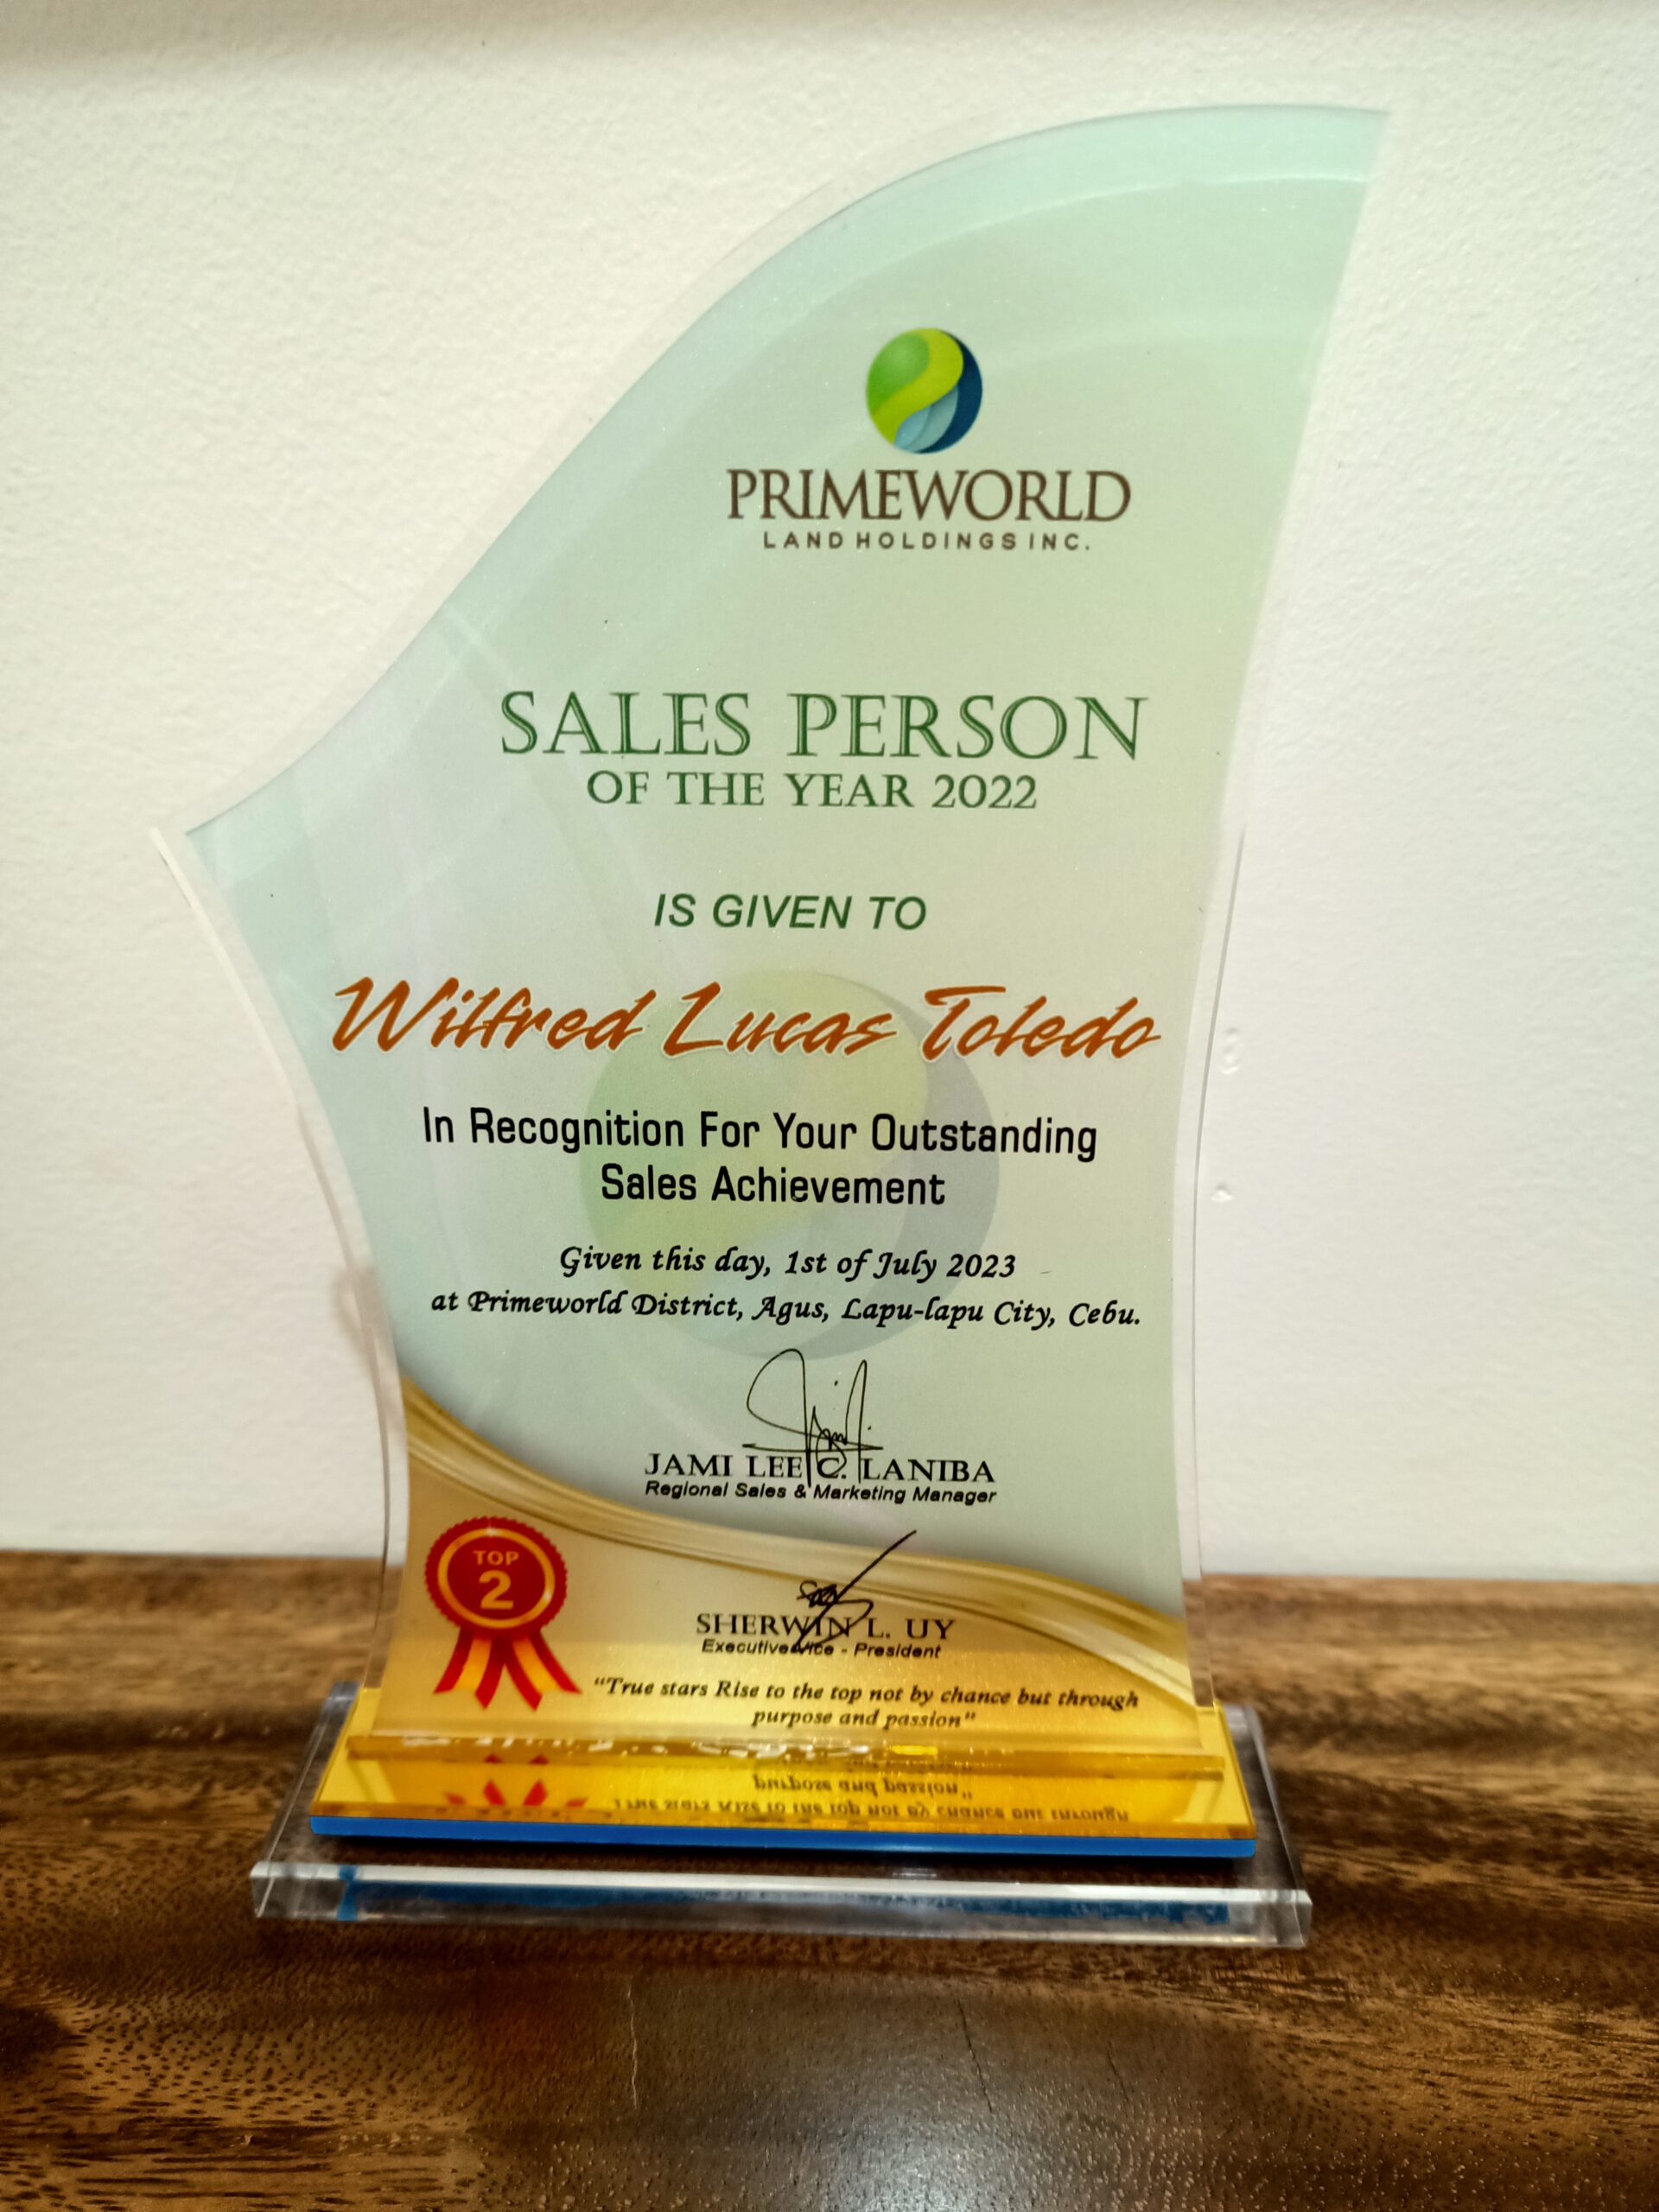 AWARDS & RECOGNITION GIVEN BY PRIMEWORLD DISTRICT